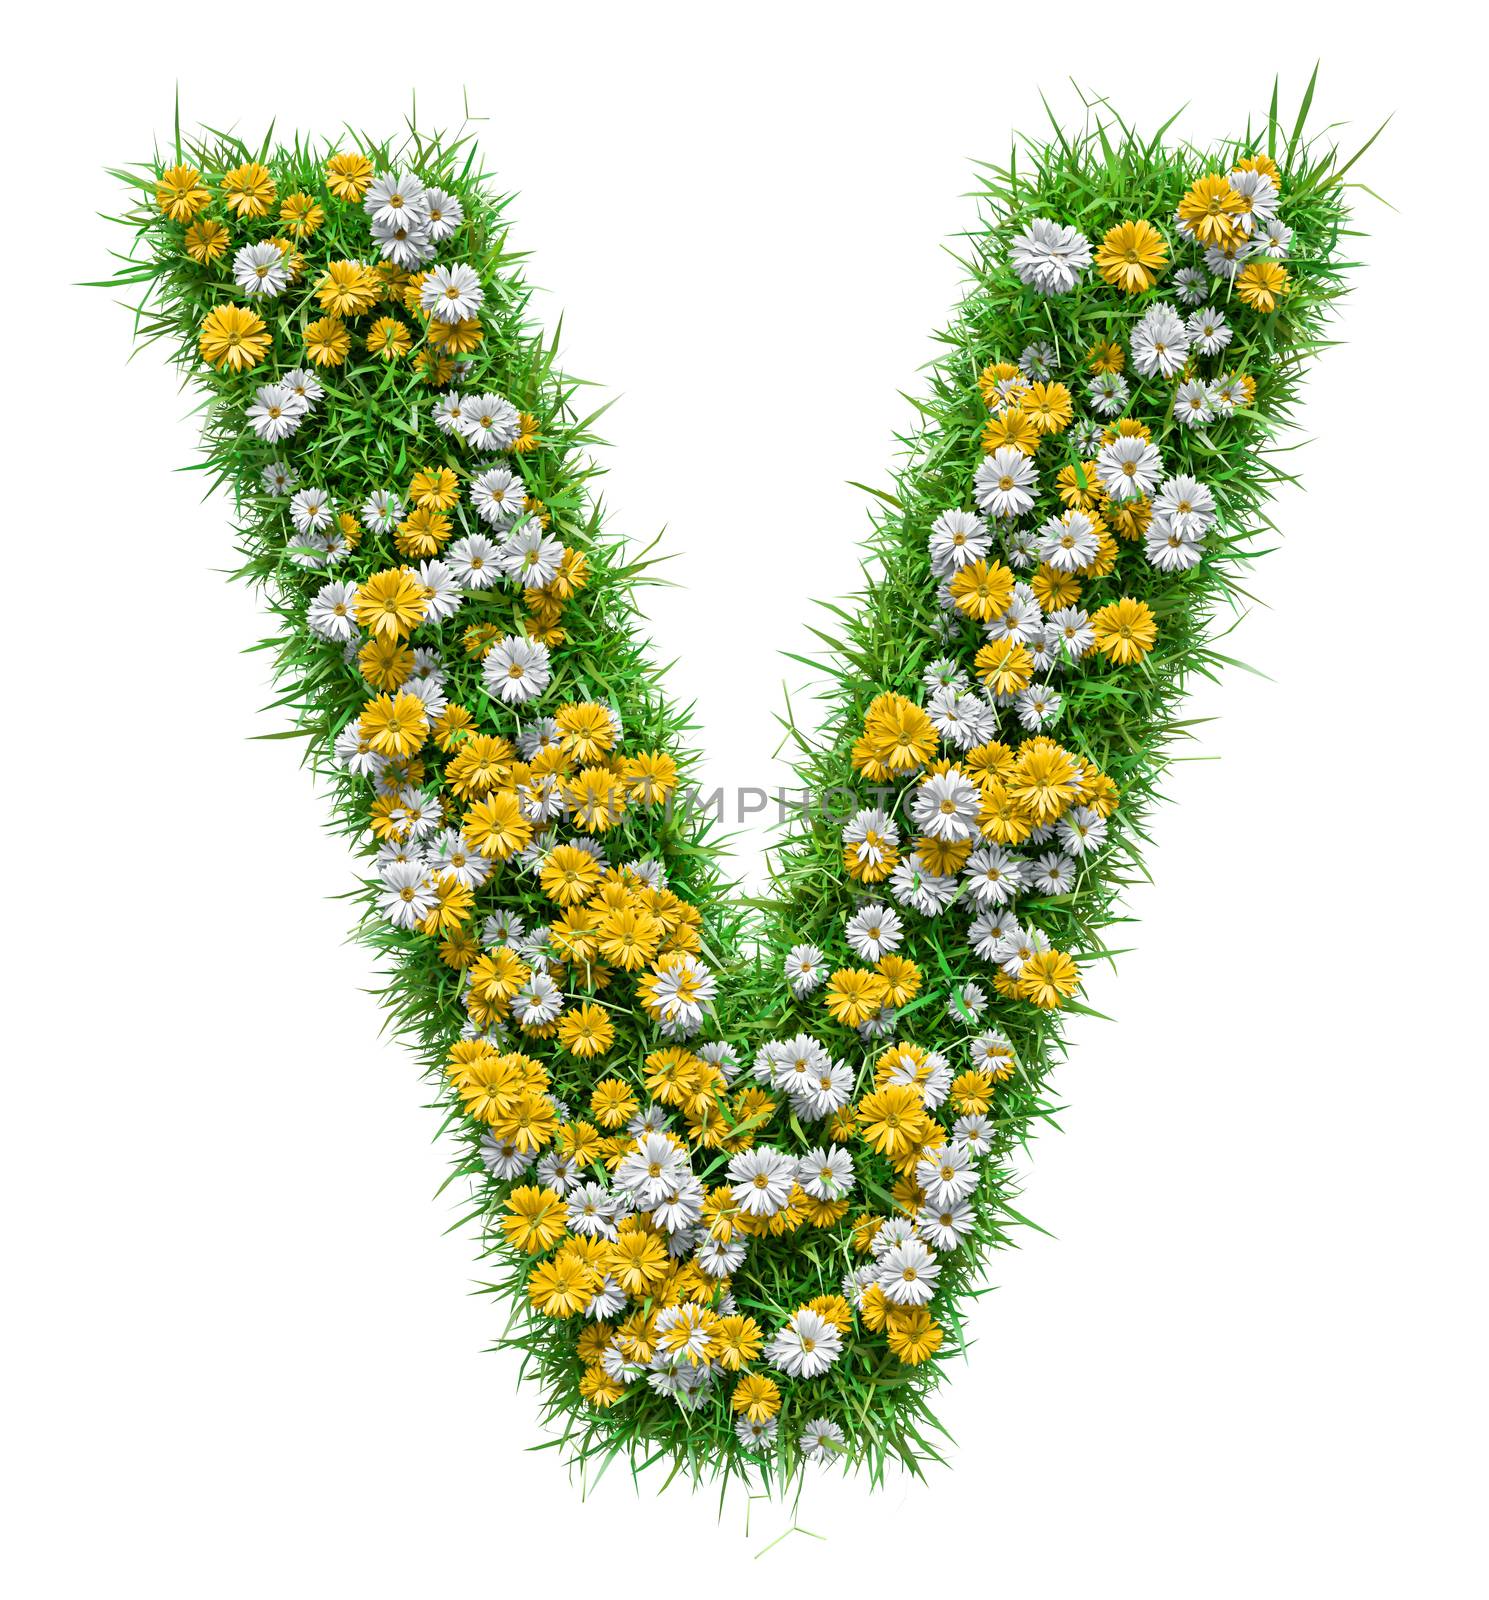 Letter V Of Green Grass And Flowers. Isolated On White Background. Font For Your Design. 3D Illustration